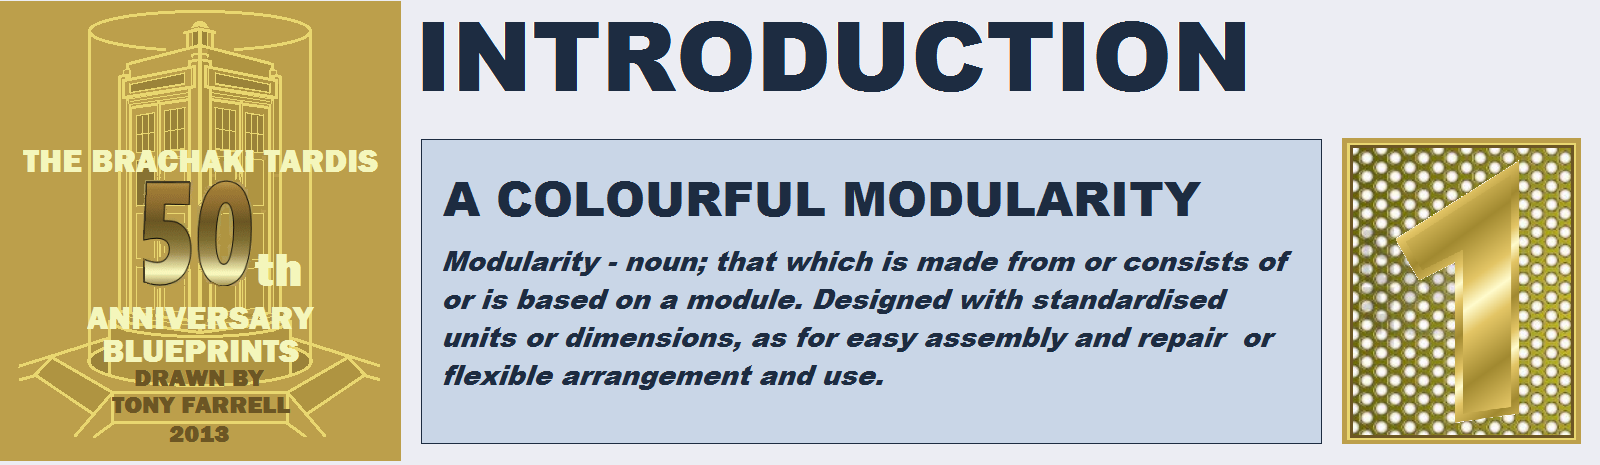 colourful modularity.png